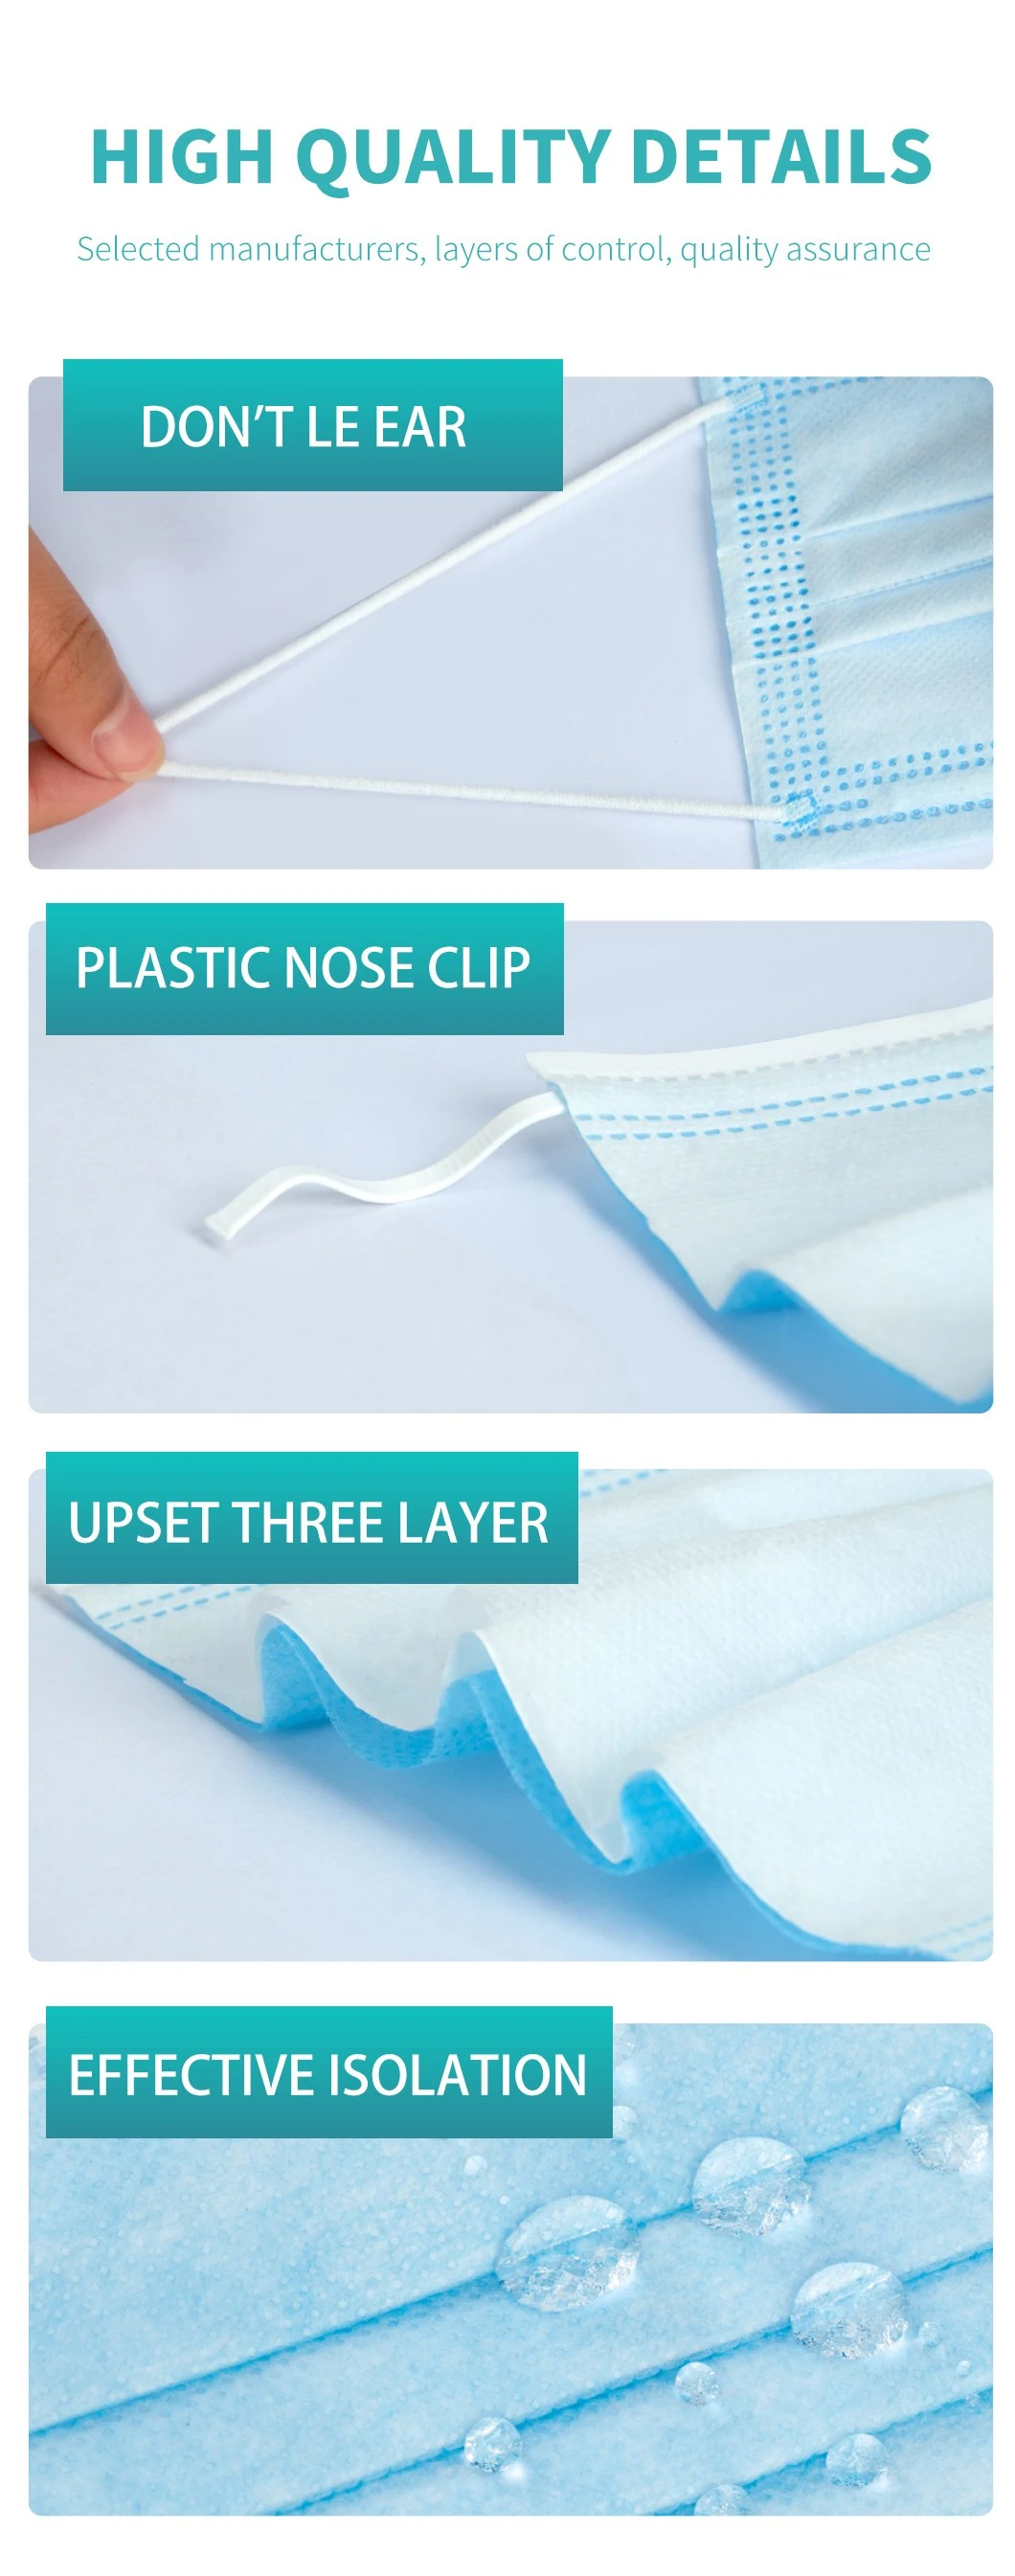 Disposable Face Mask 2ply/3ply/4ply Ear Loop & Tie on Disposable Face Mask